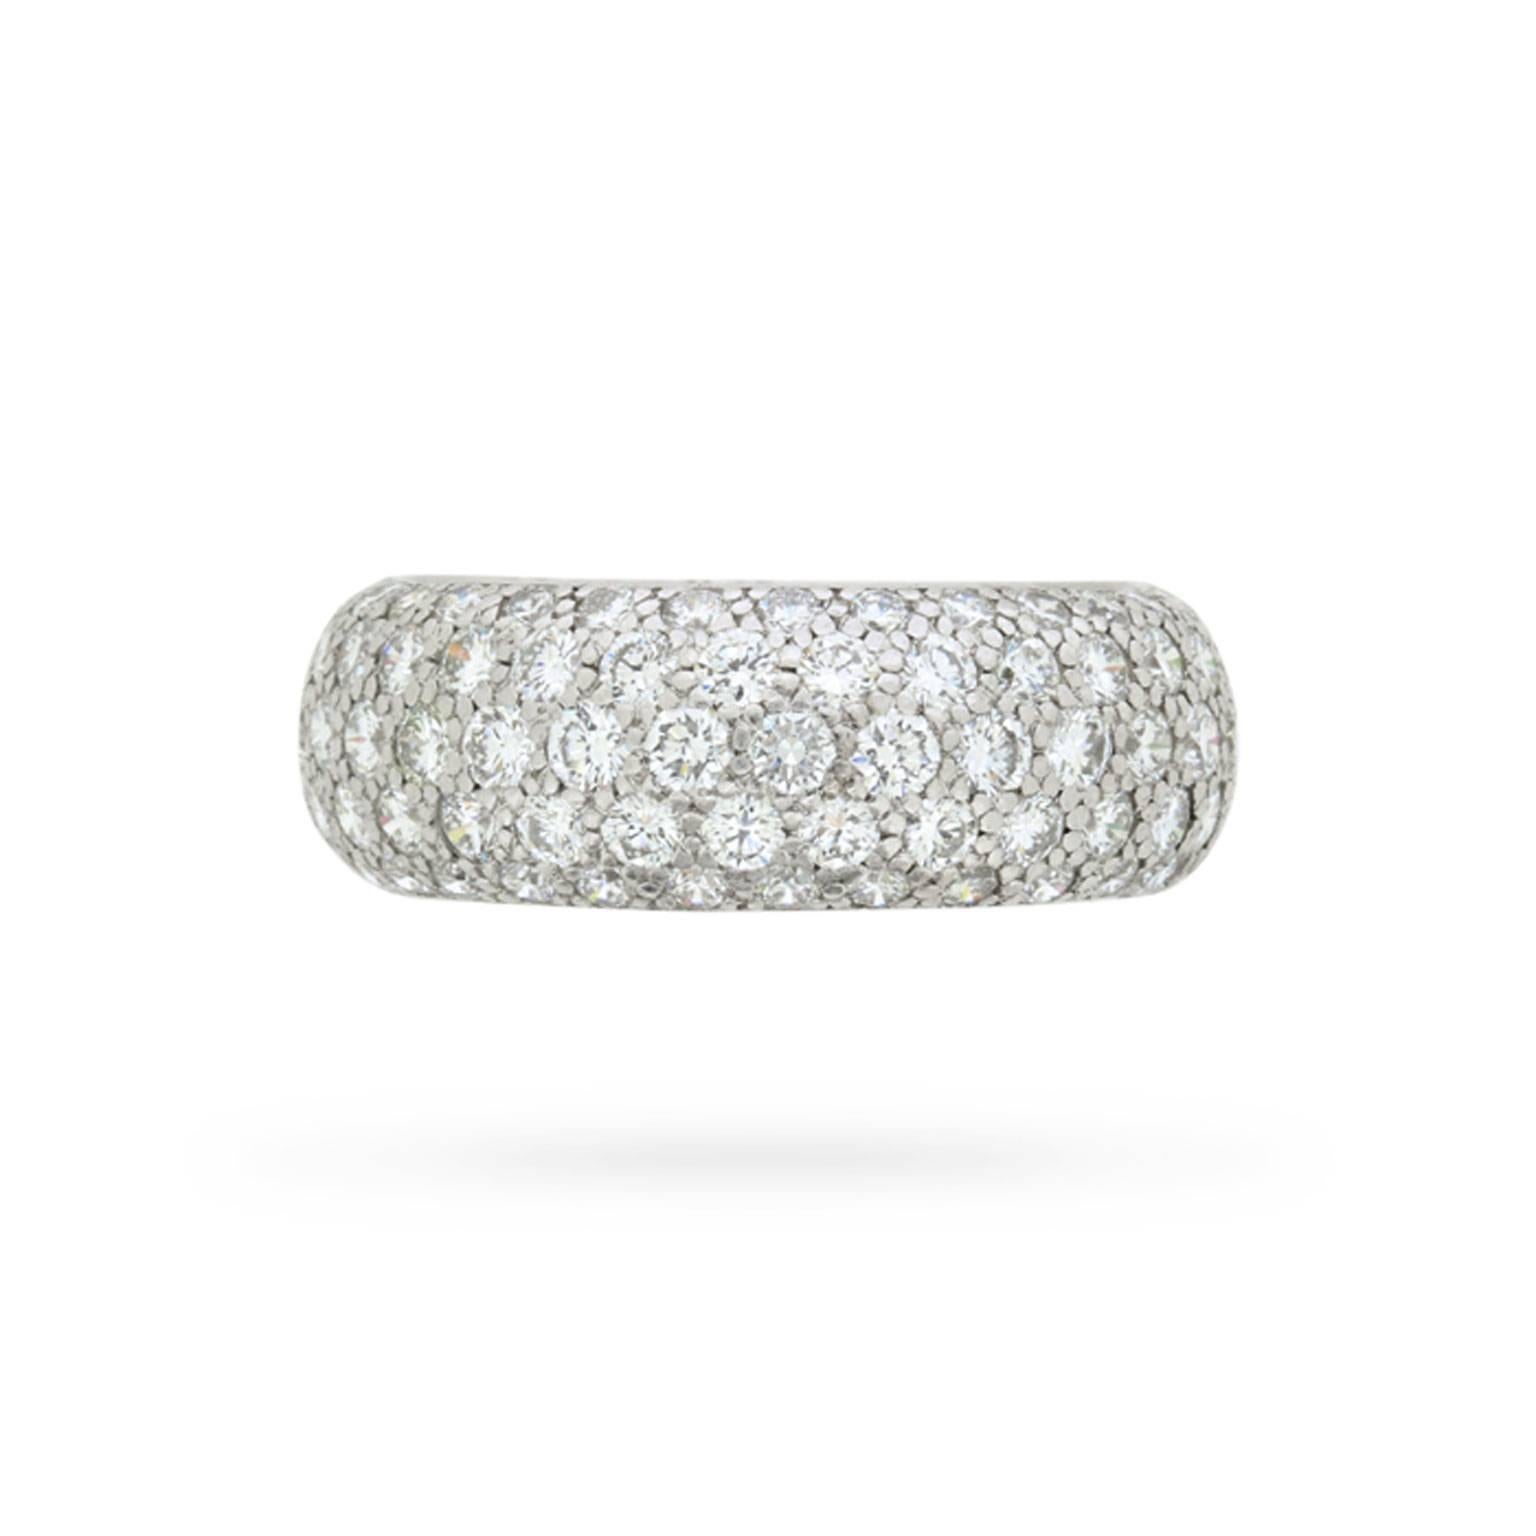 A beloved style for decades, this circa 1970s Tiffany & Co. diamond eternity ring is part of the luxury jeweller’s Etoile collection.

This bombé-shaped platinum band sparkles from every angle with five glittering rows of E-F colour, VVS